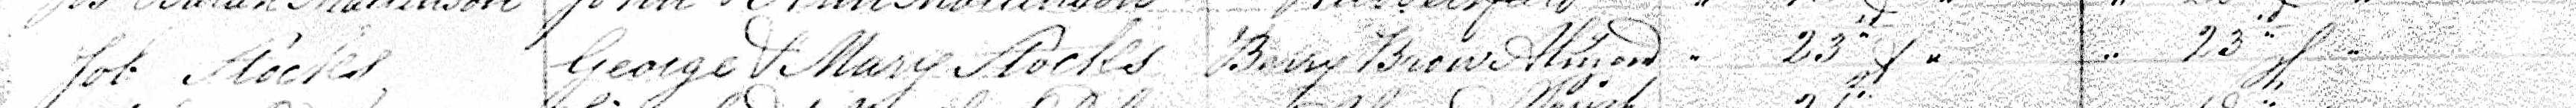 Taken in 1803 and sourced from Certificate - Baptism.